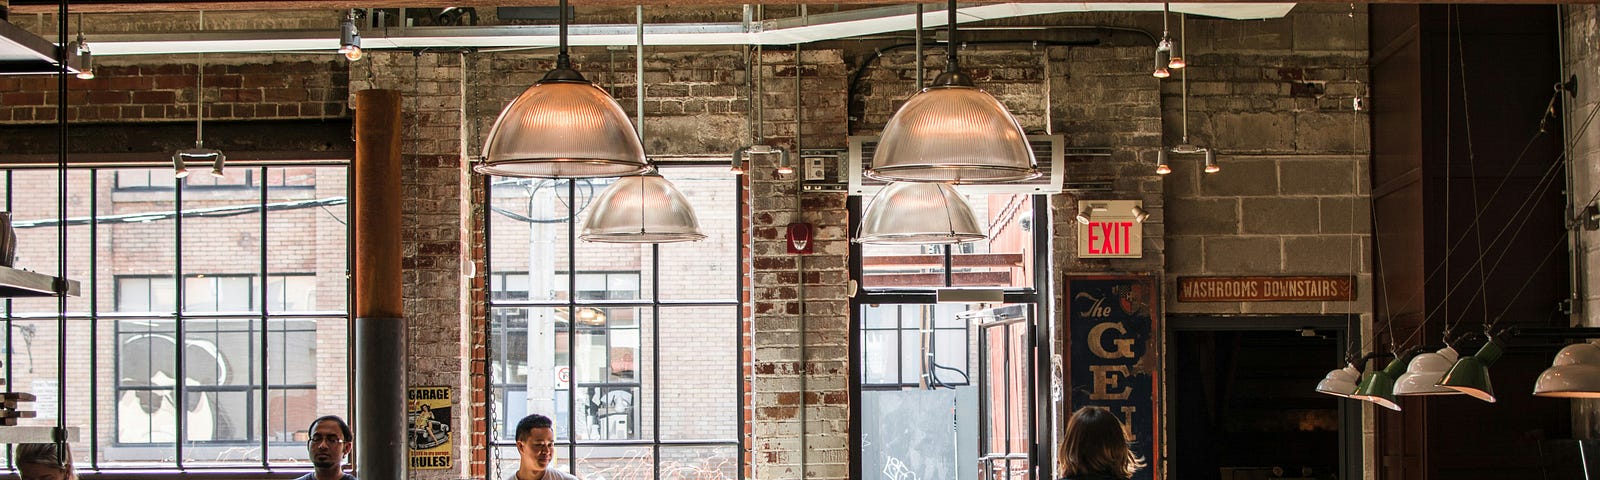 A busy, modern coffee shop with exposed brick walls, large metal-framed windows and vintage signs on the walls.